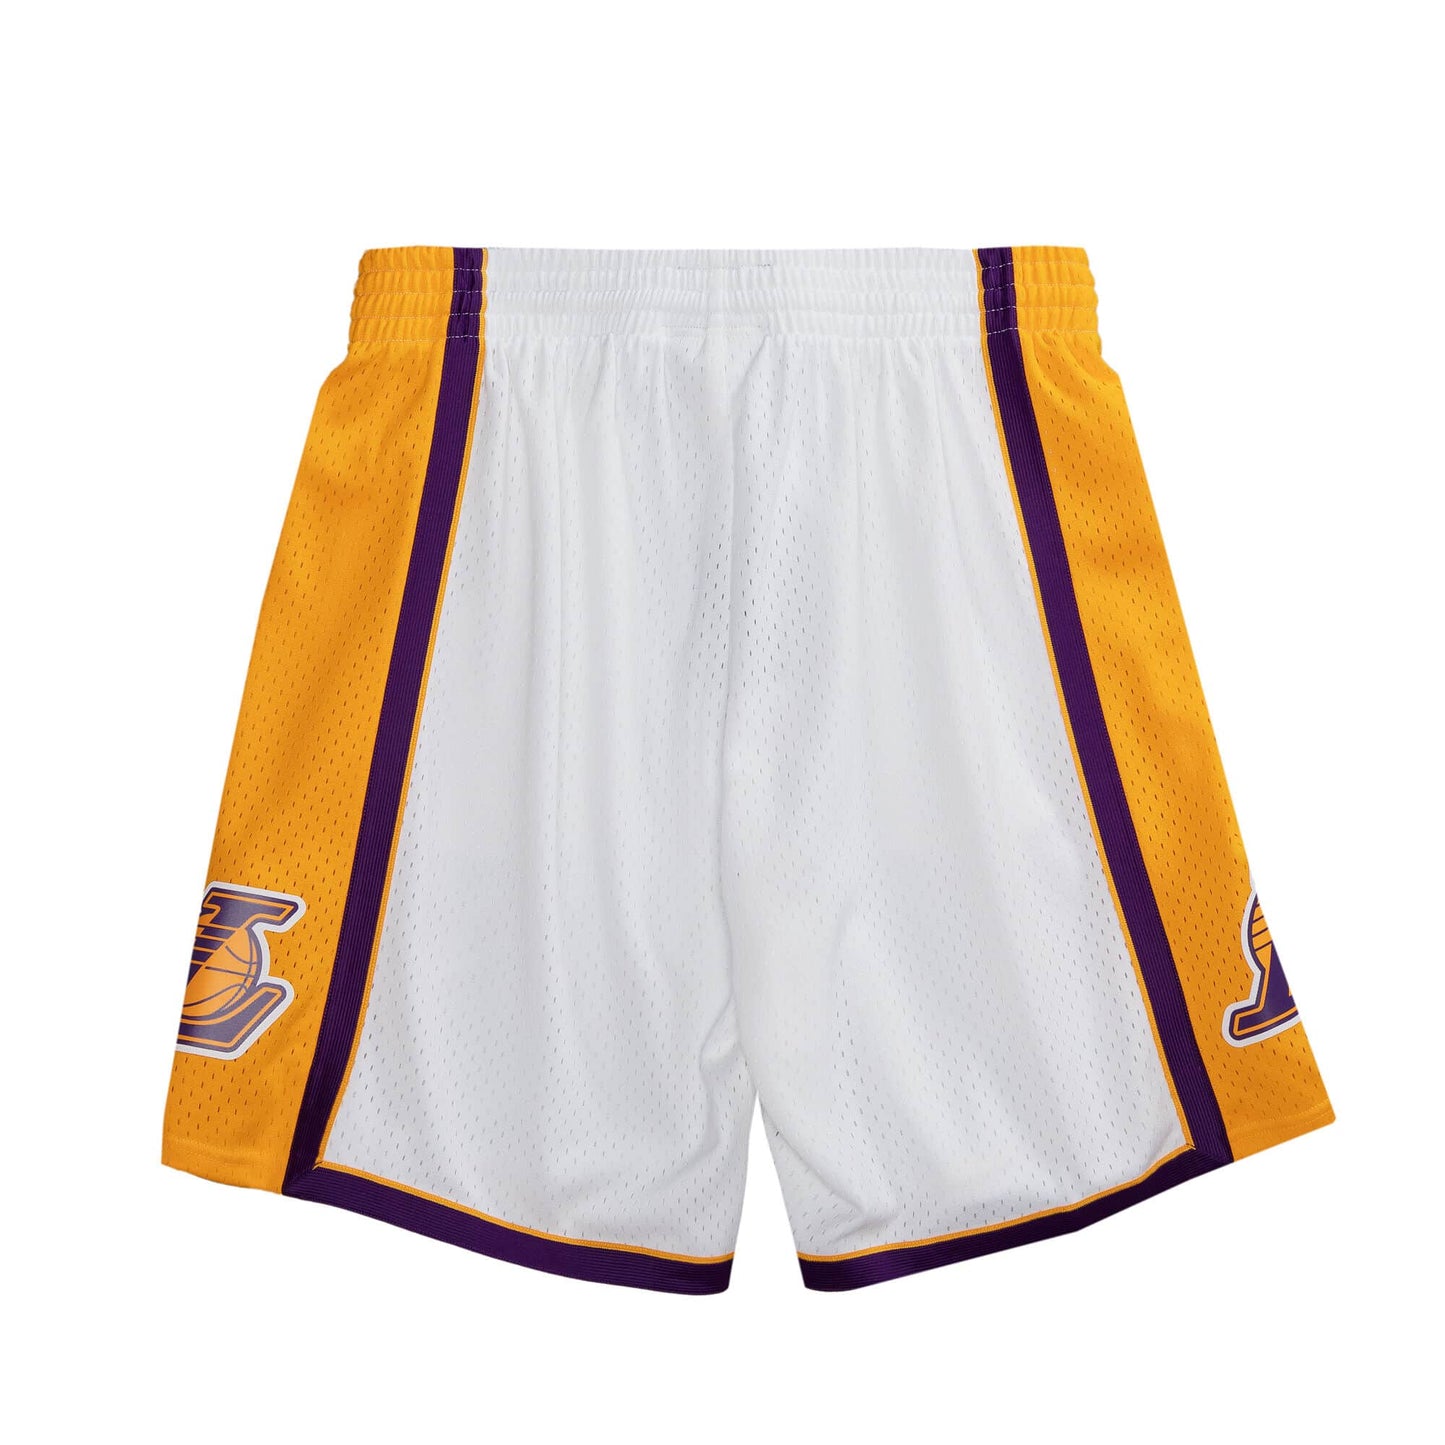 Los Angeles Lakers Mitchell and Ness Hardwood Classics 2009-2010 Home White Swingman Shorts